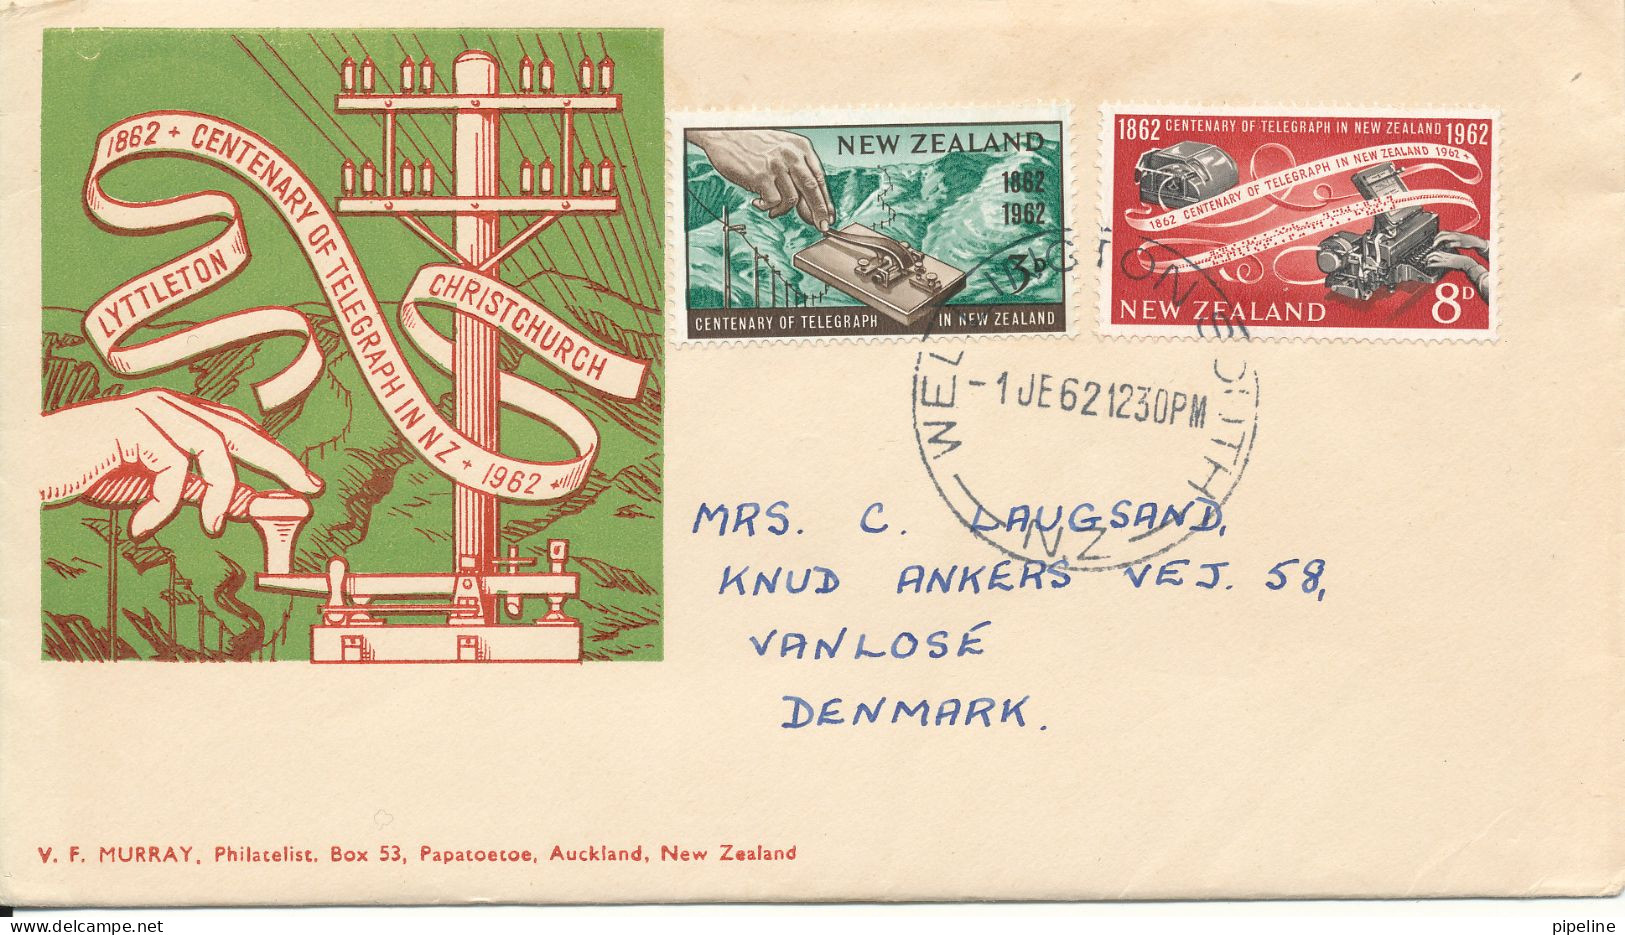 New Zealand FDC 1-6-1962 Centennary Of Telegraph Christchurch - Lyttleton 1862 - 1962 Complete Set Of 2 With Cachet Sent - FDC